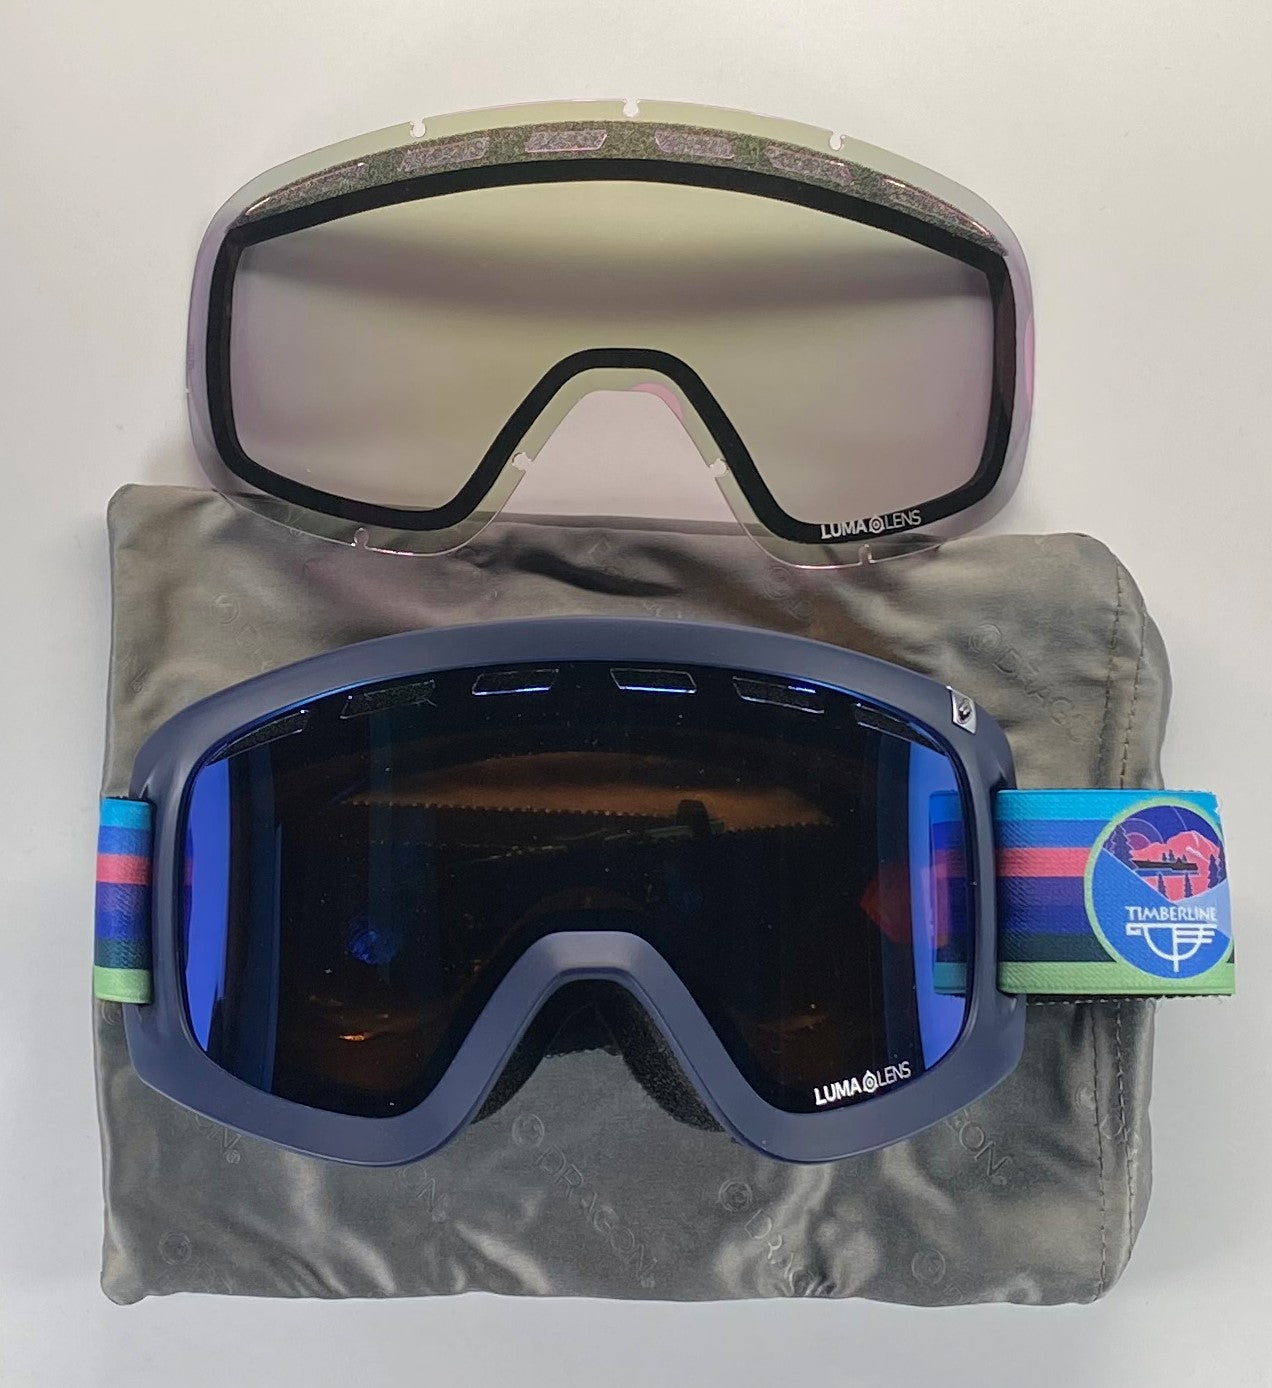 Einde Accor vorst Limited Release Timberline Lodge Edition Dragon Ski/Snowboard Goggles -  Timberline Lodge Online Store